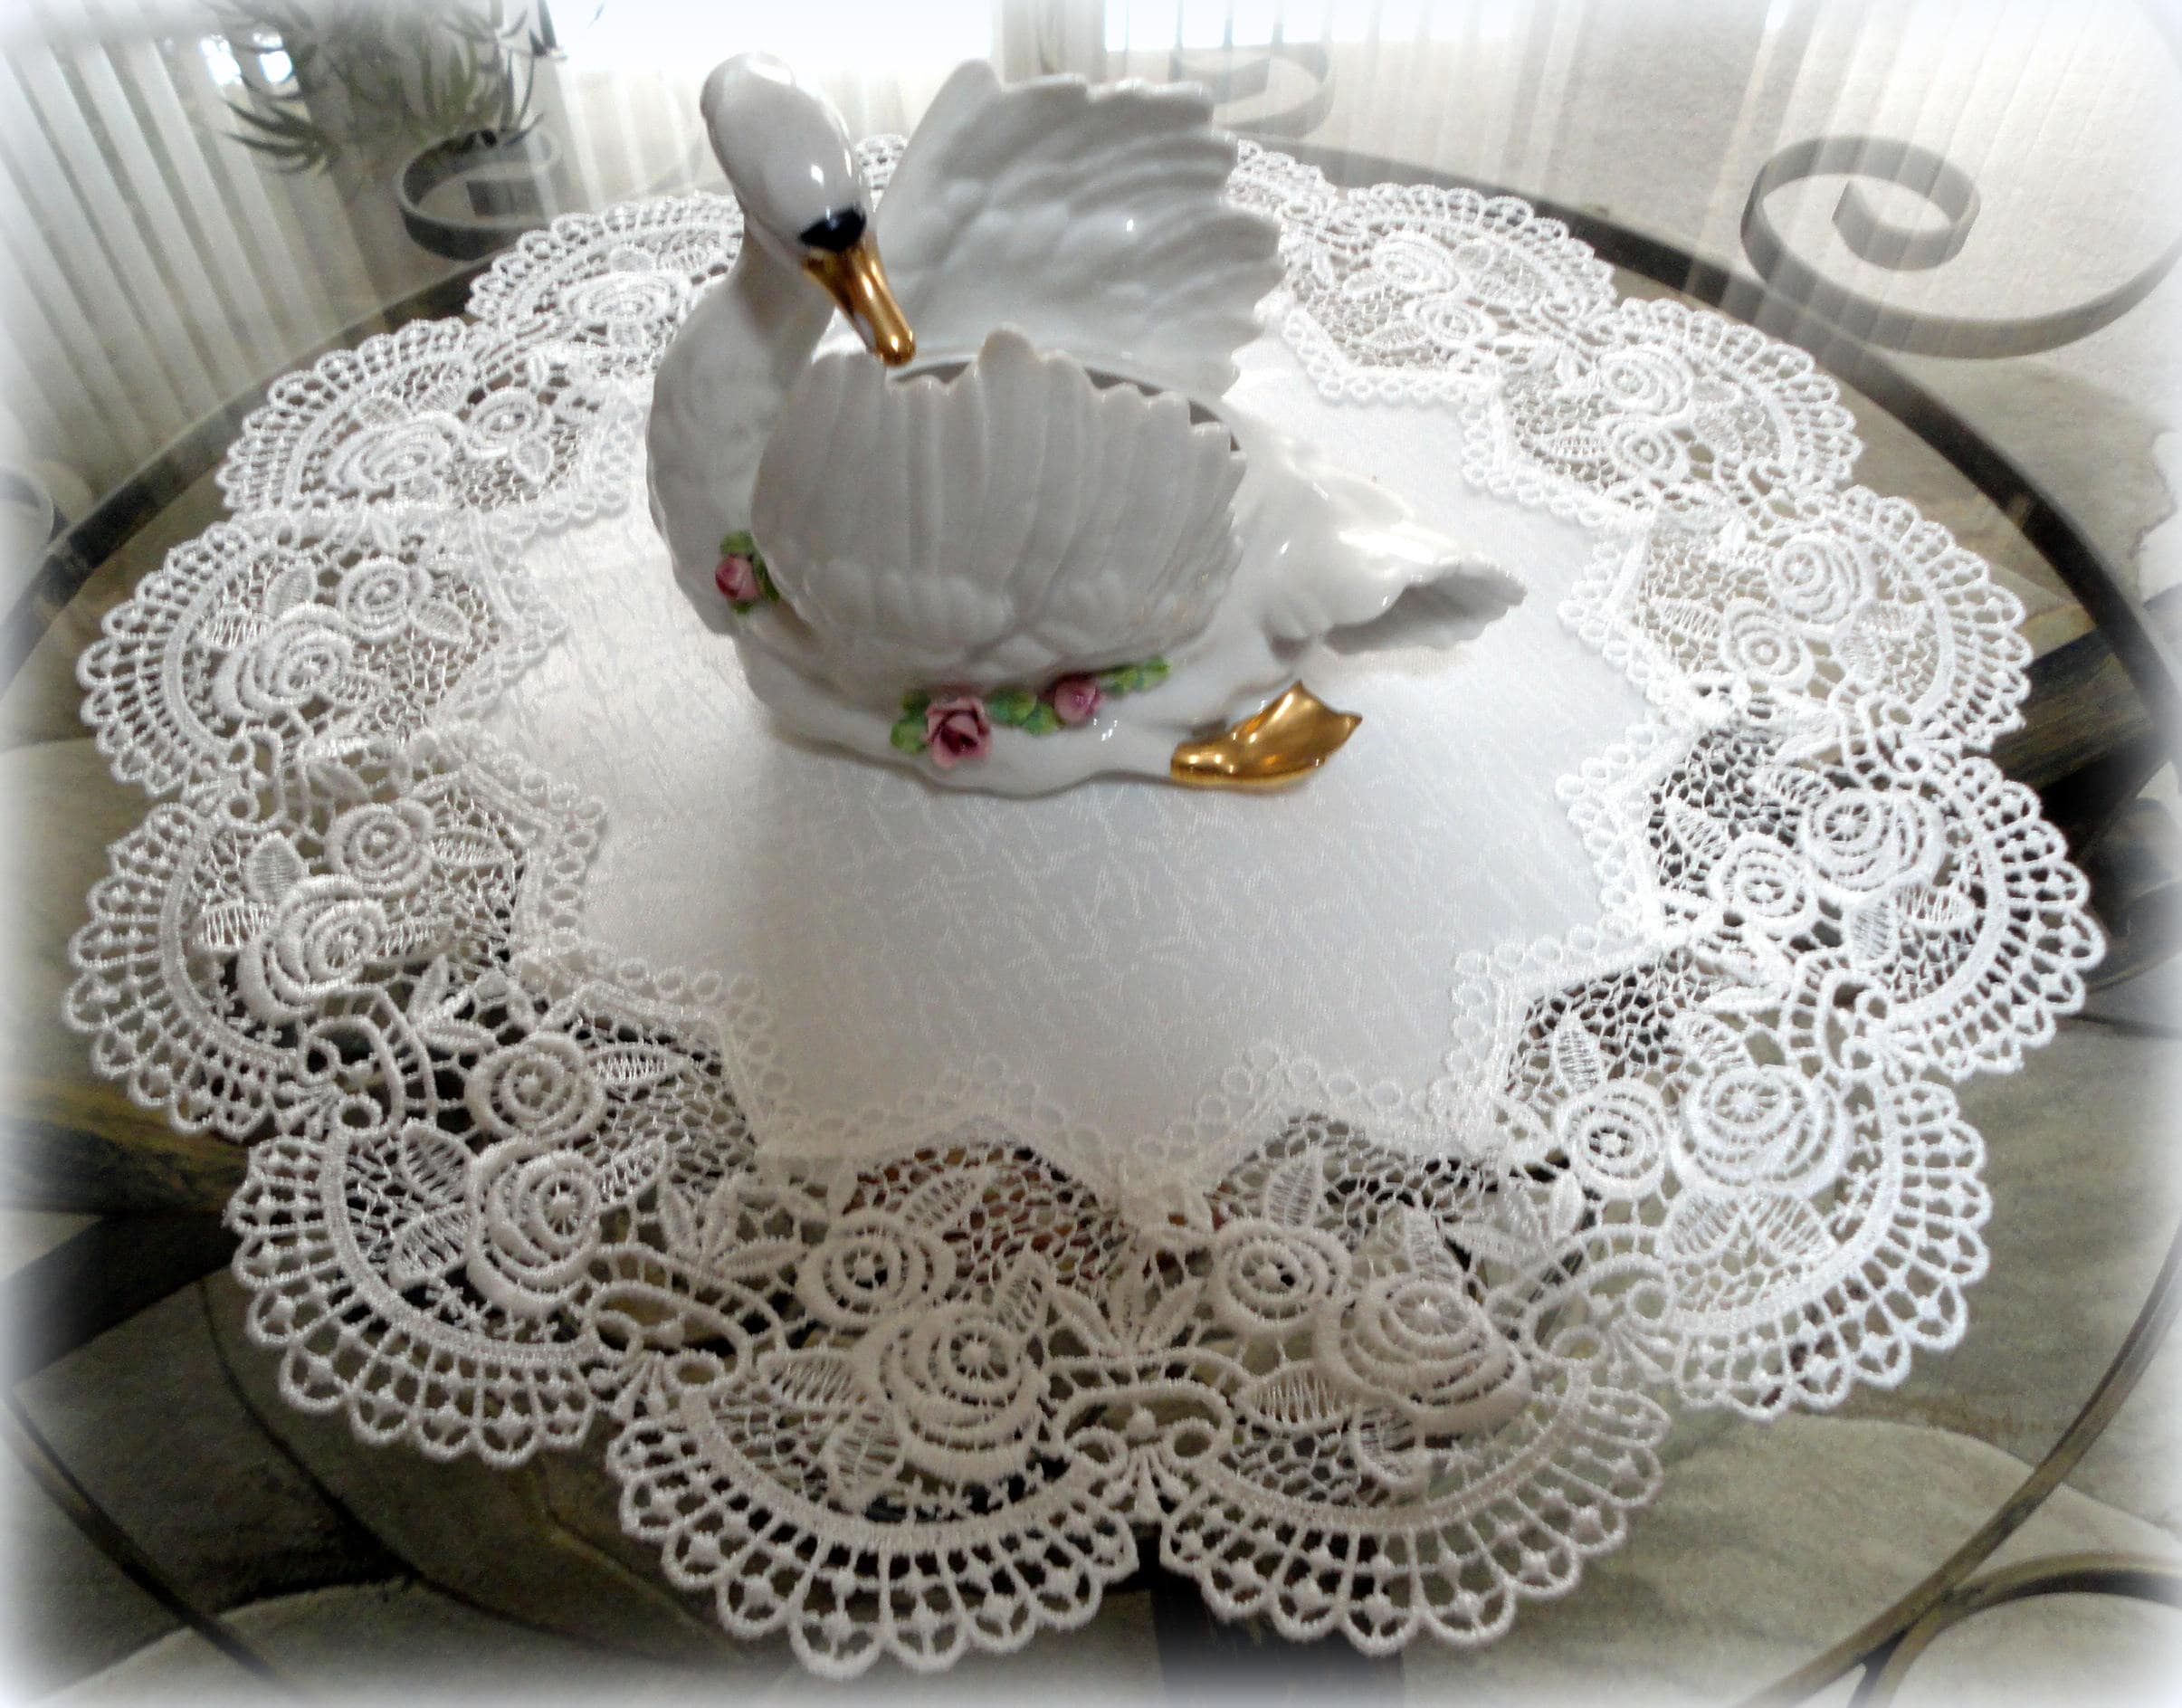 Classic Rose Lace Doily European Round 16" Table Topper Antique White 